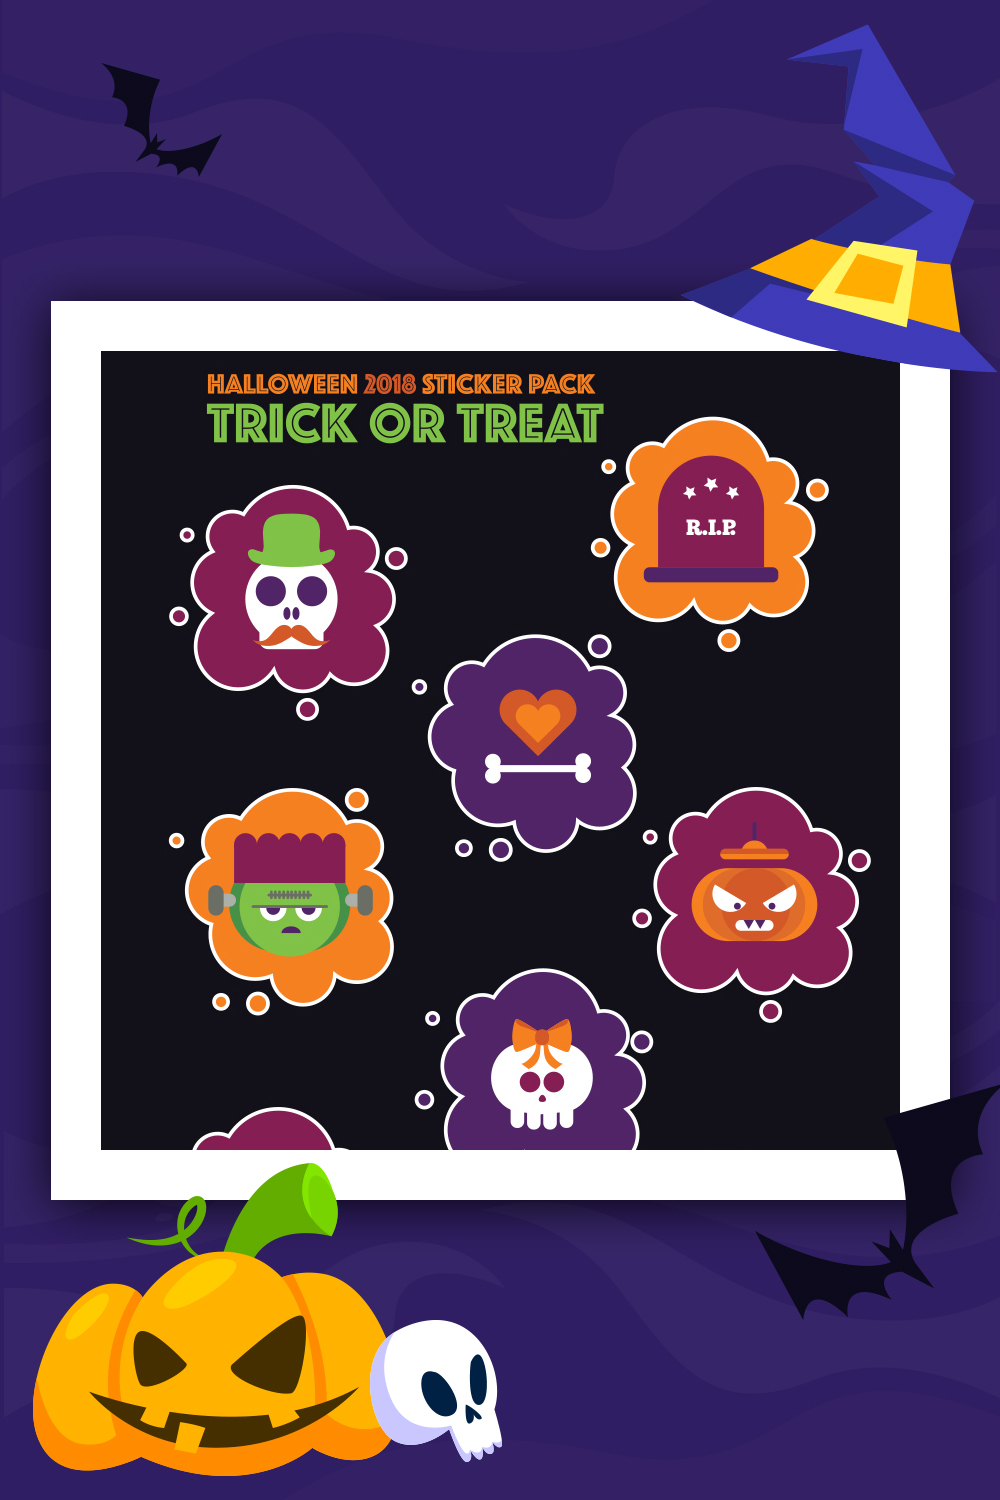 Halloween Stickers Pack: Trick or Treat Illustration